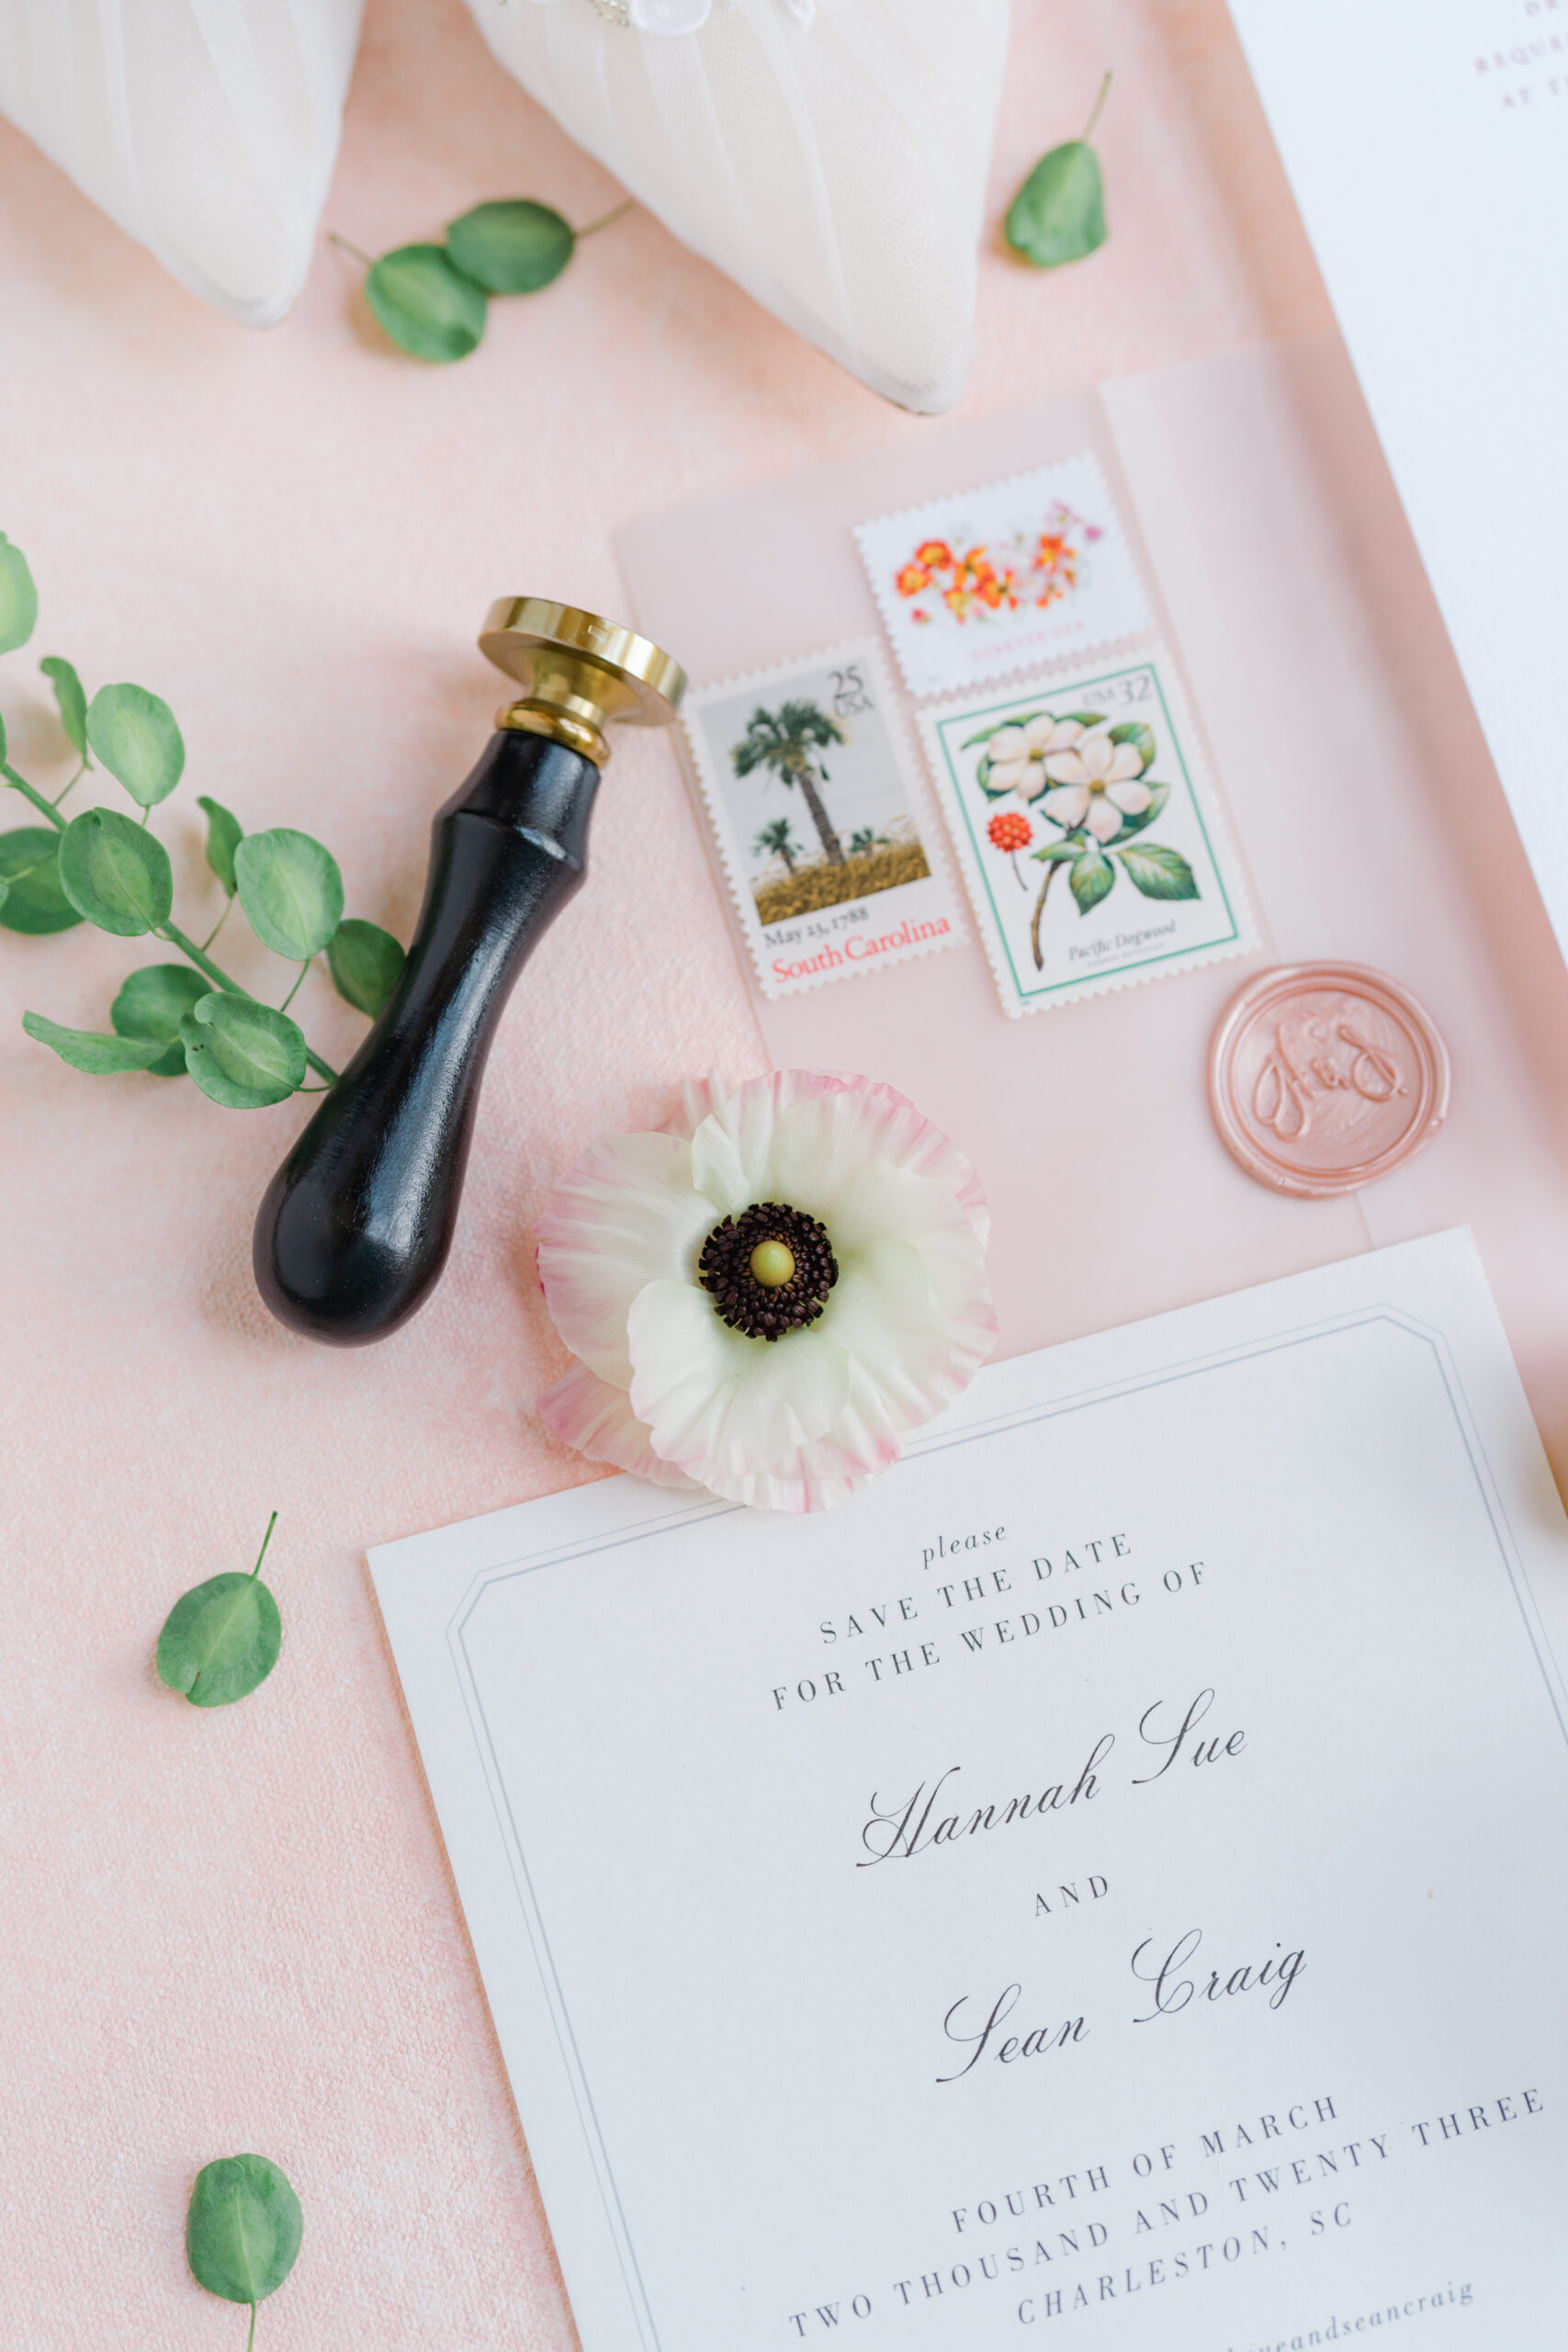 Stamps and wax seal press with wedding save the date. South Carolina stamps.